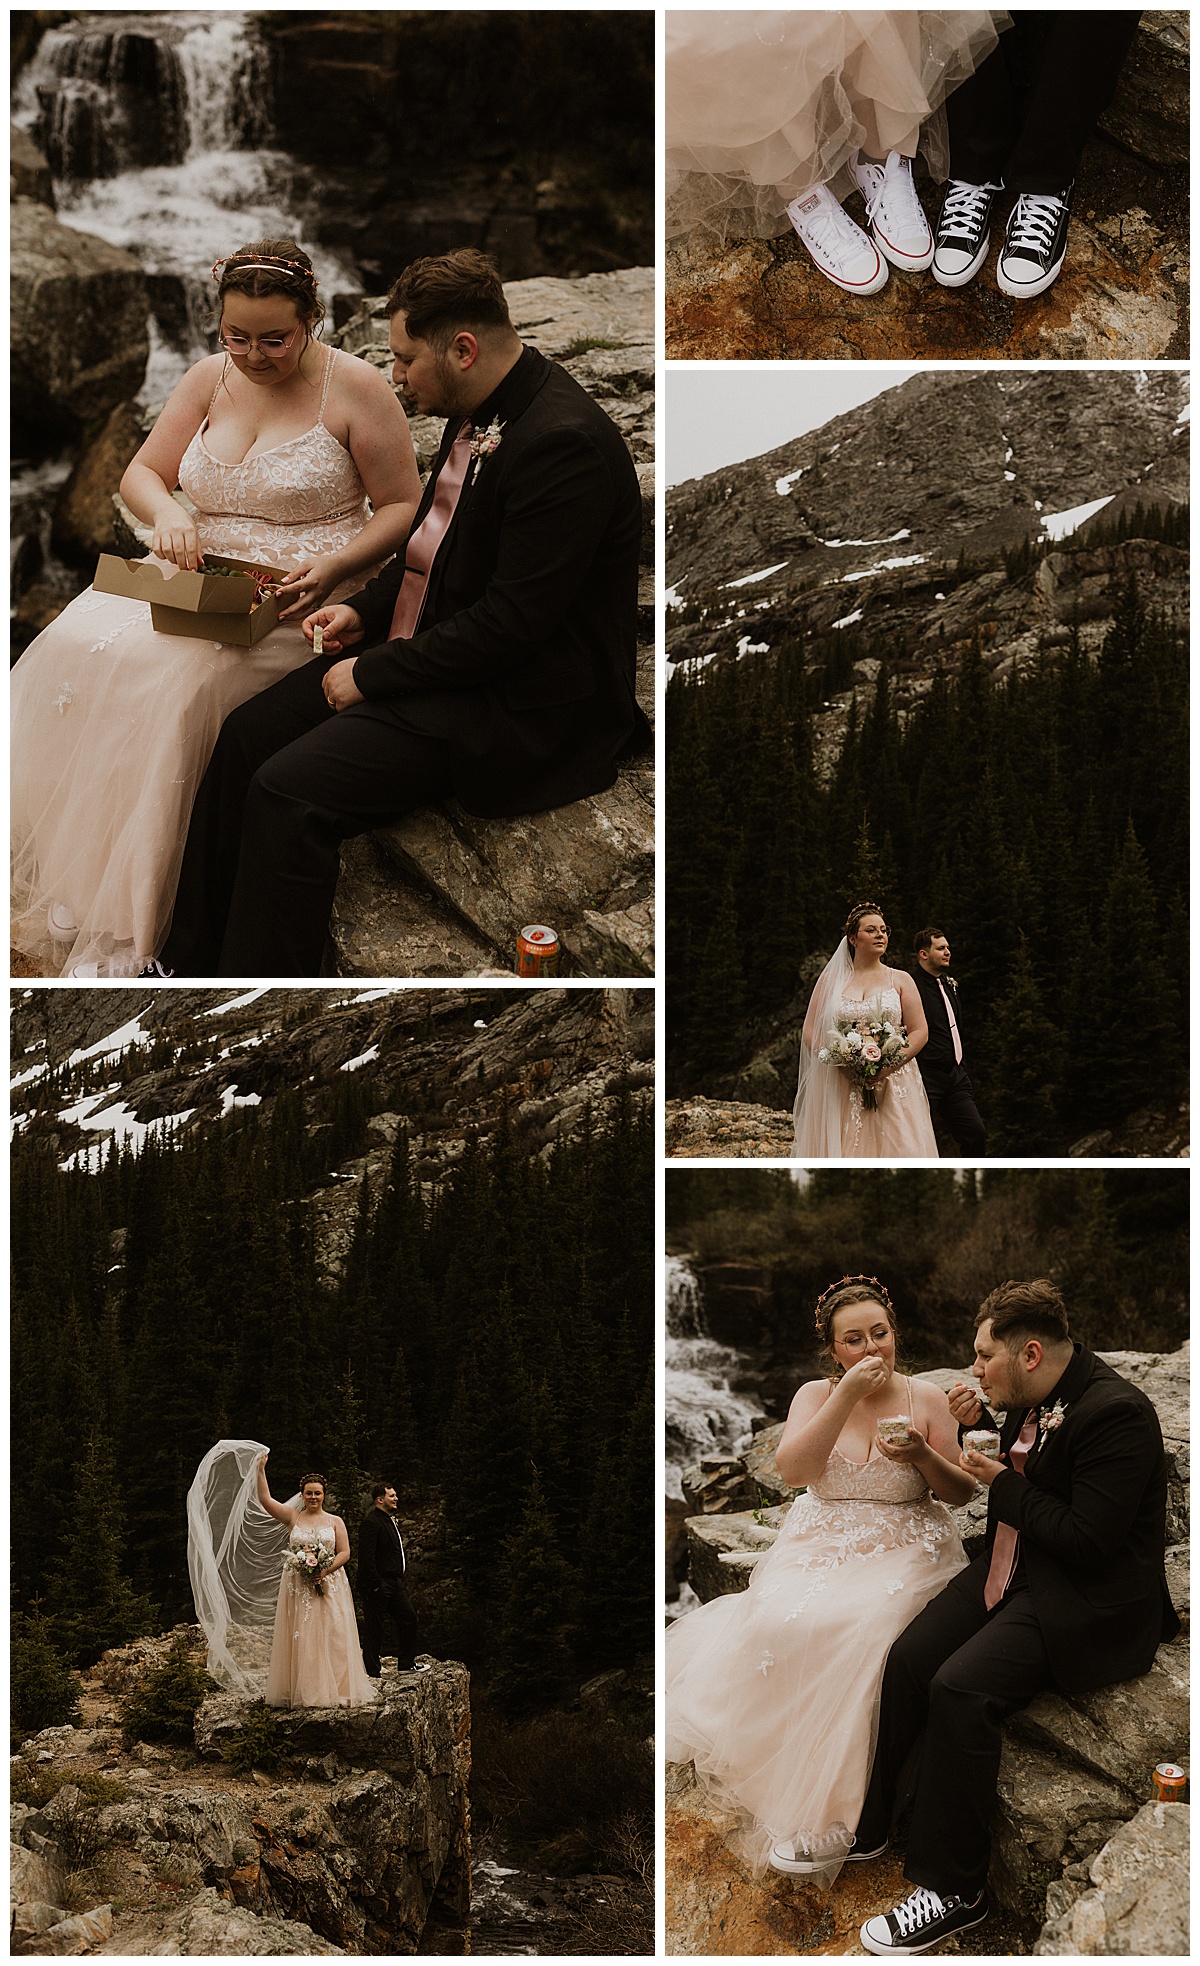 A couple poses for photos in the mountain as part of their Breckenridge hybrid elopement.